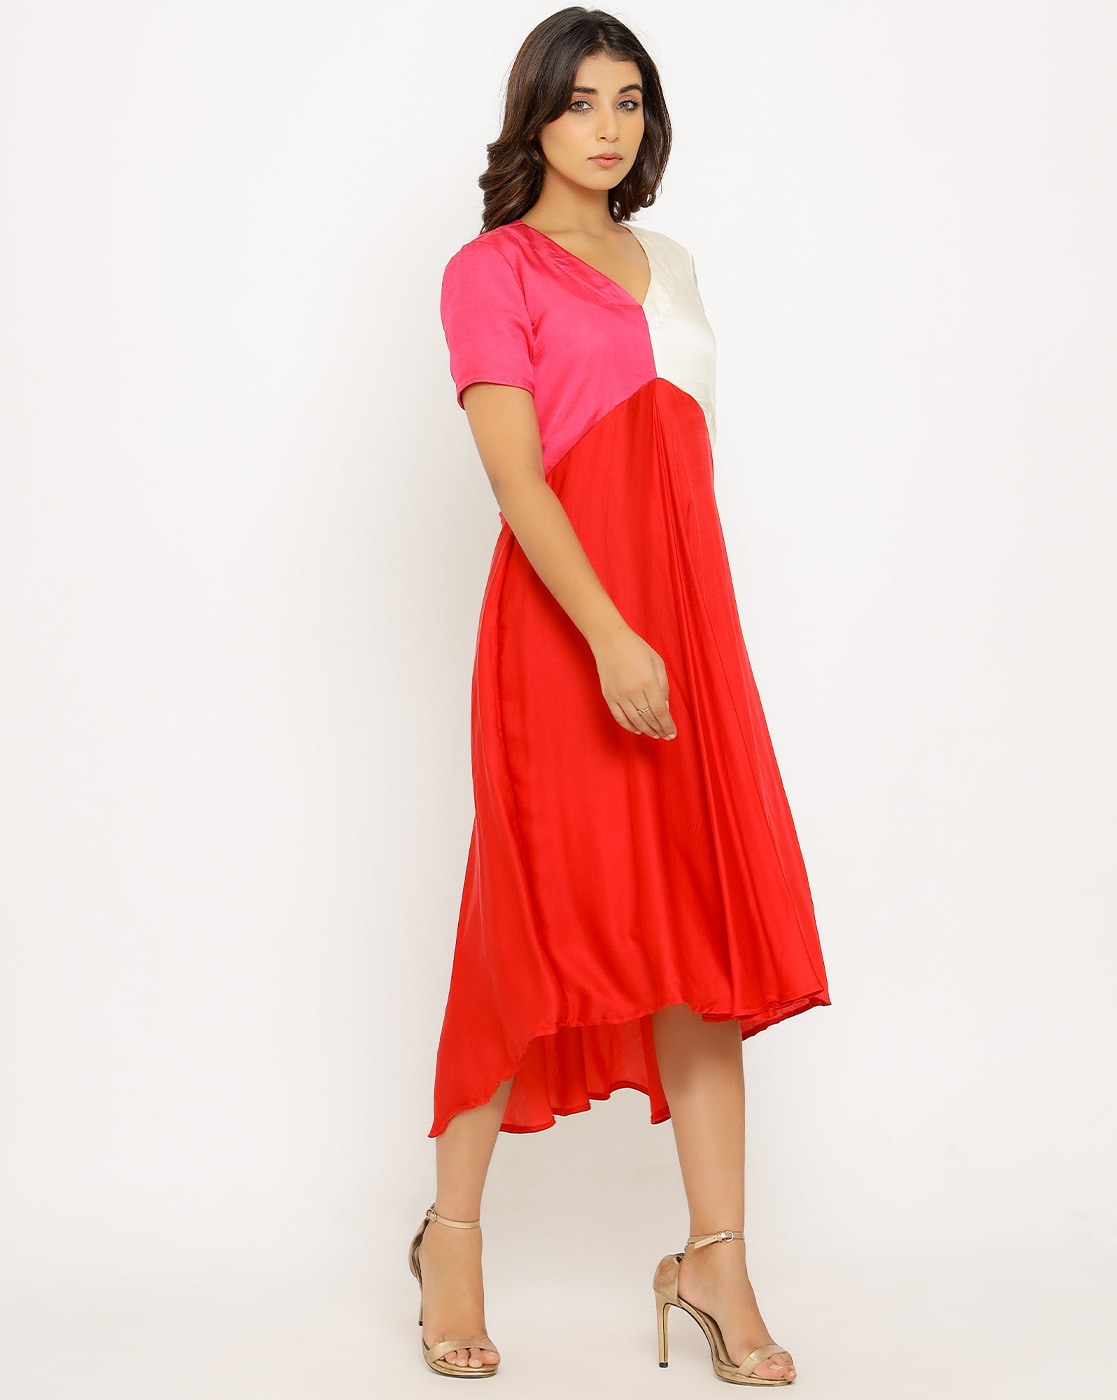 red midi dress worn with black turtleneck and accessories